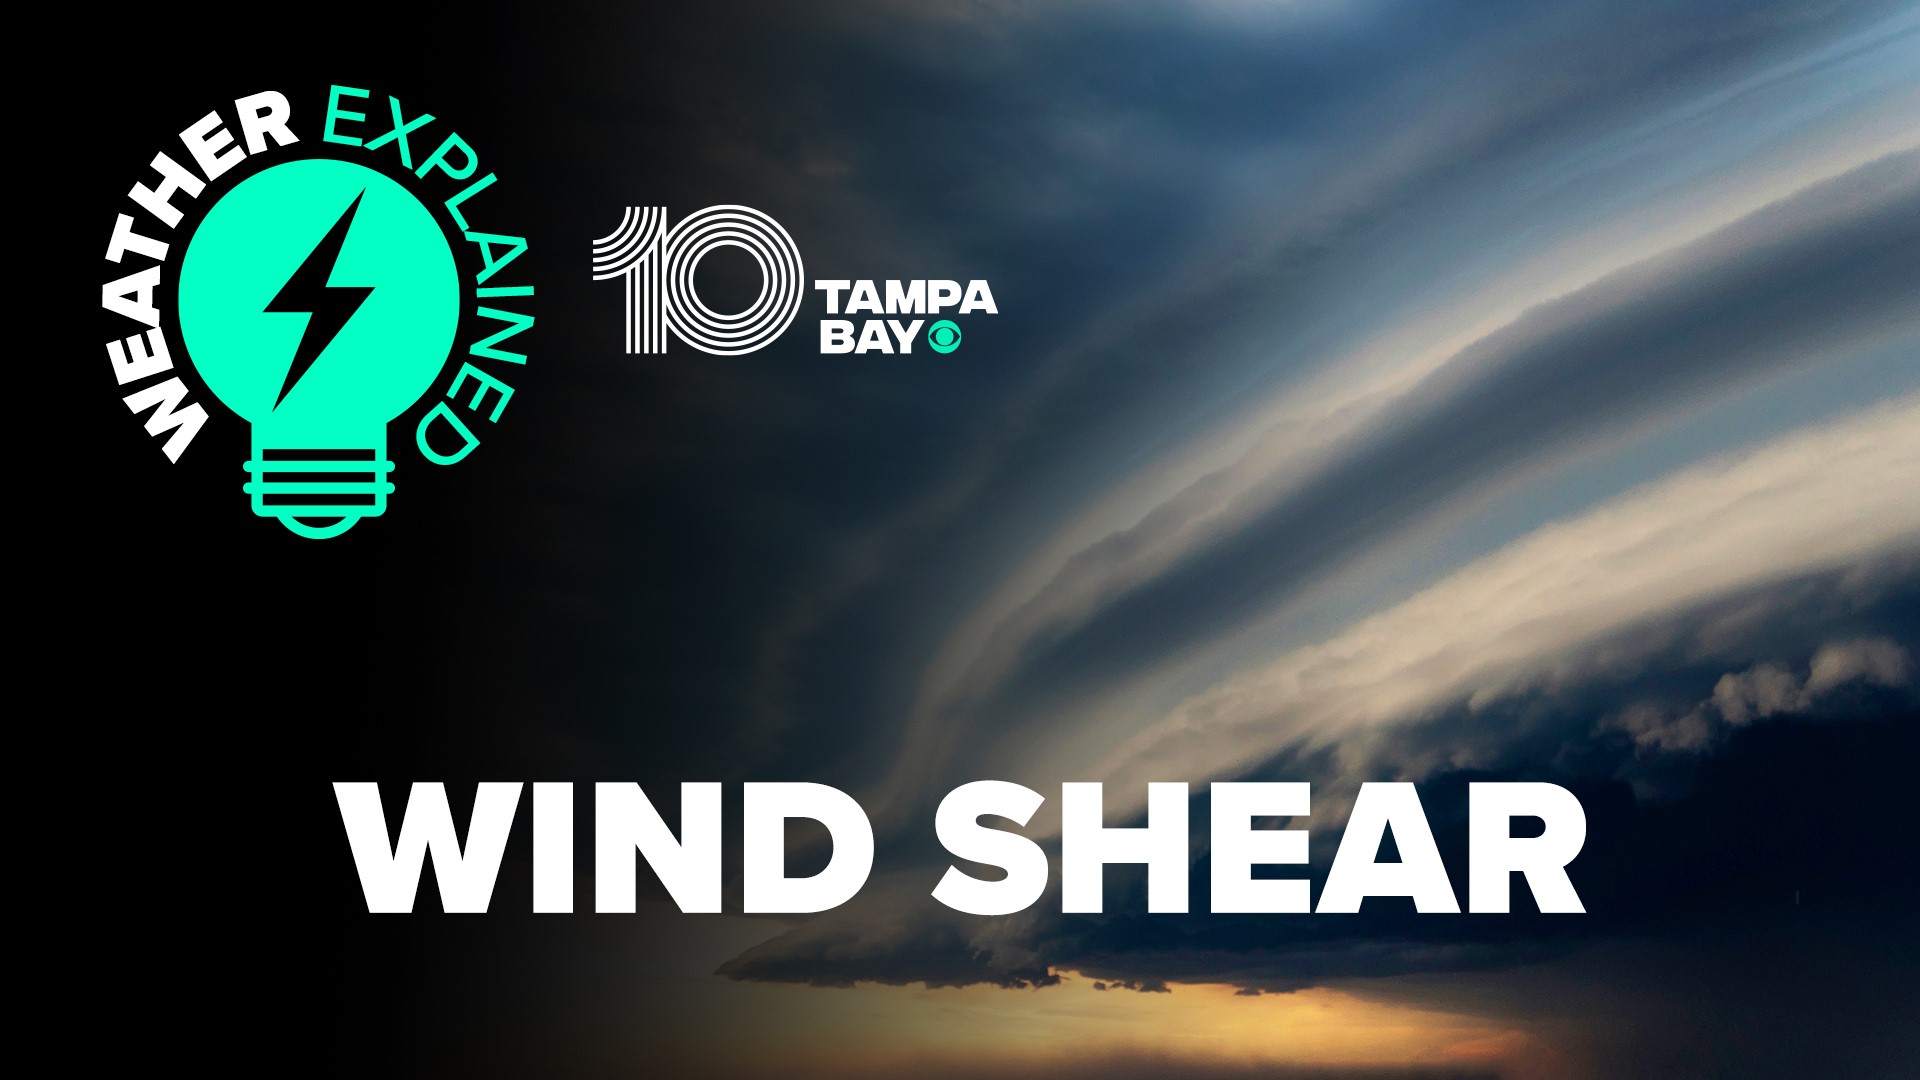 Hurricanes do not like wind shear. Chief Meteorologist Bobby Deskins explains how wind shear affects tropical systems.